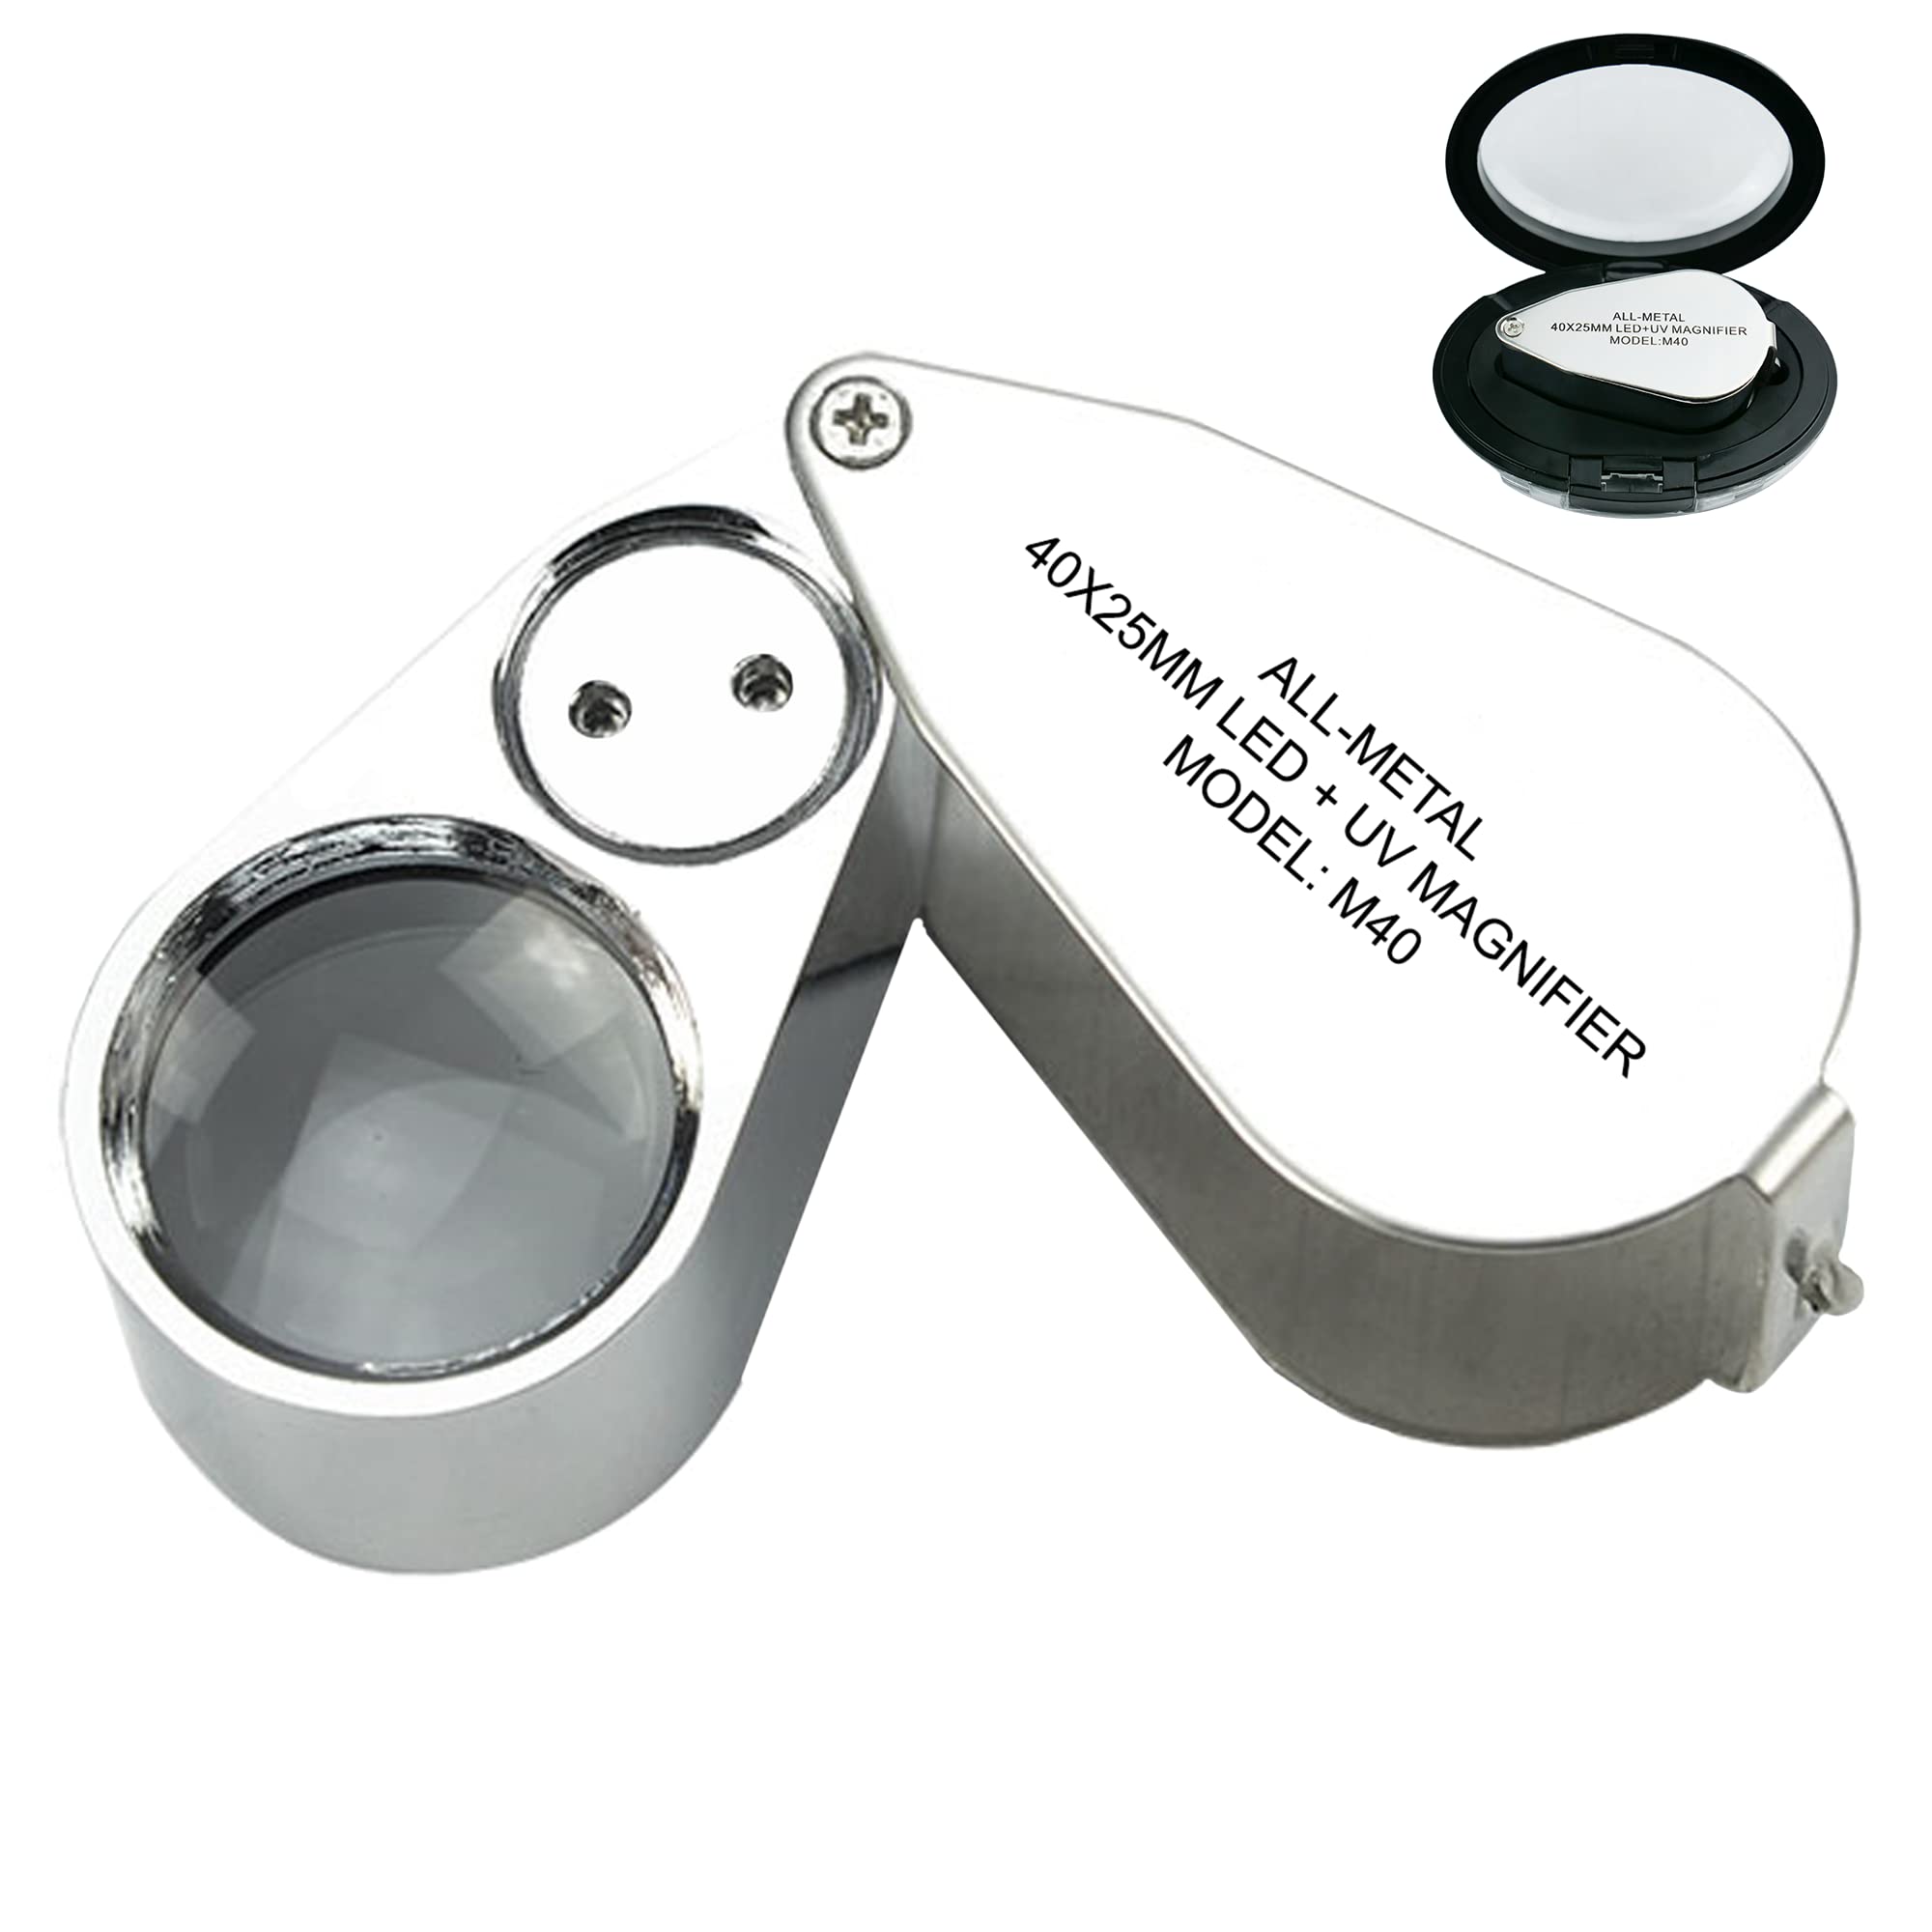 Crystal Clear 3.5 Magnifier With Light 